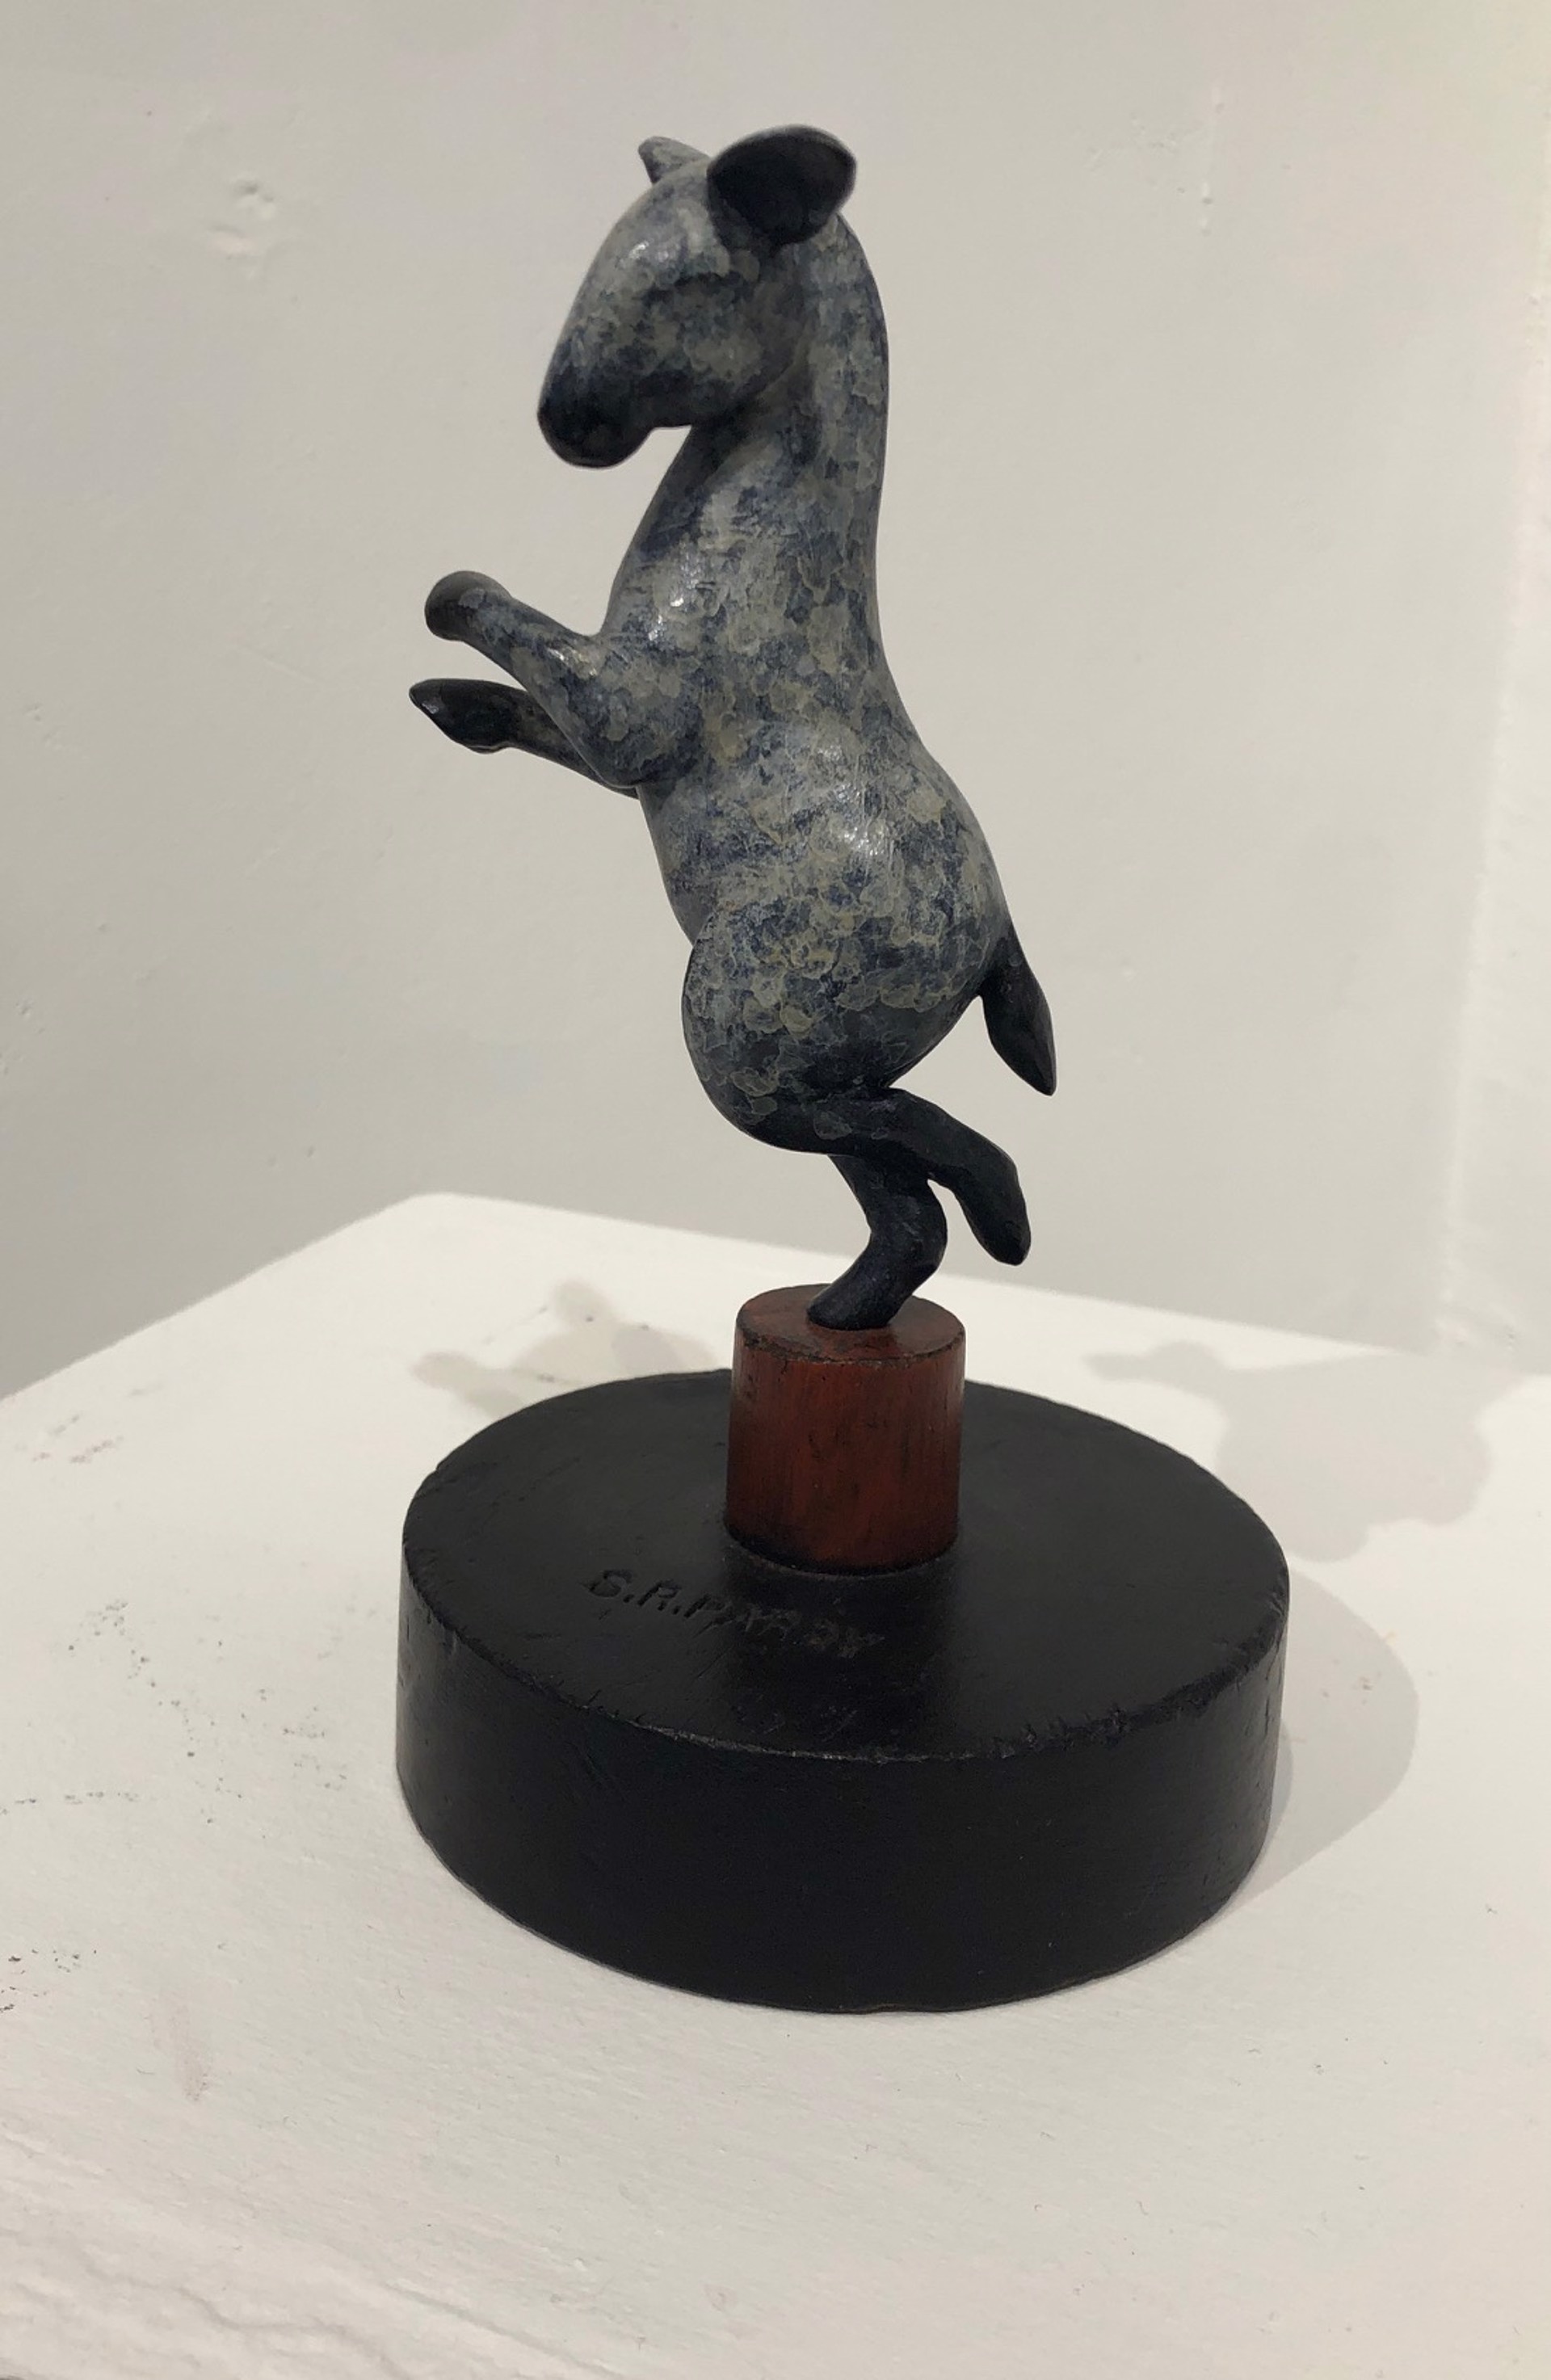 Dancing Burro I on an Industrial Mold by Copper Tritscheller